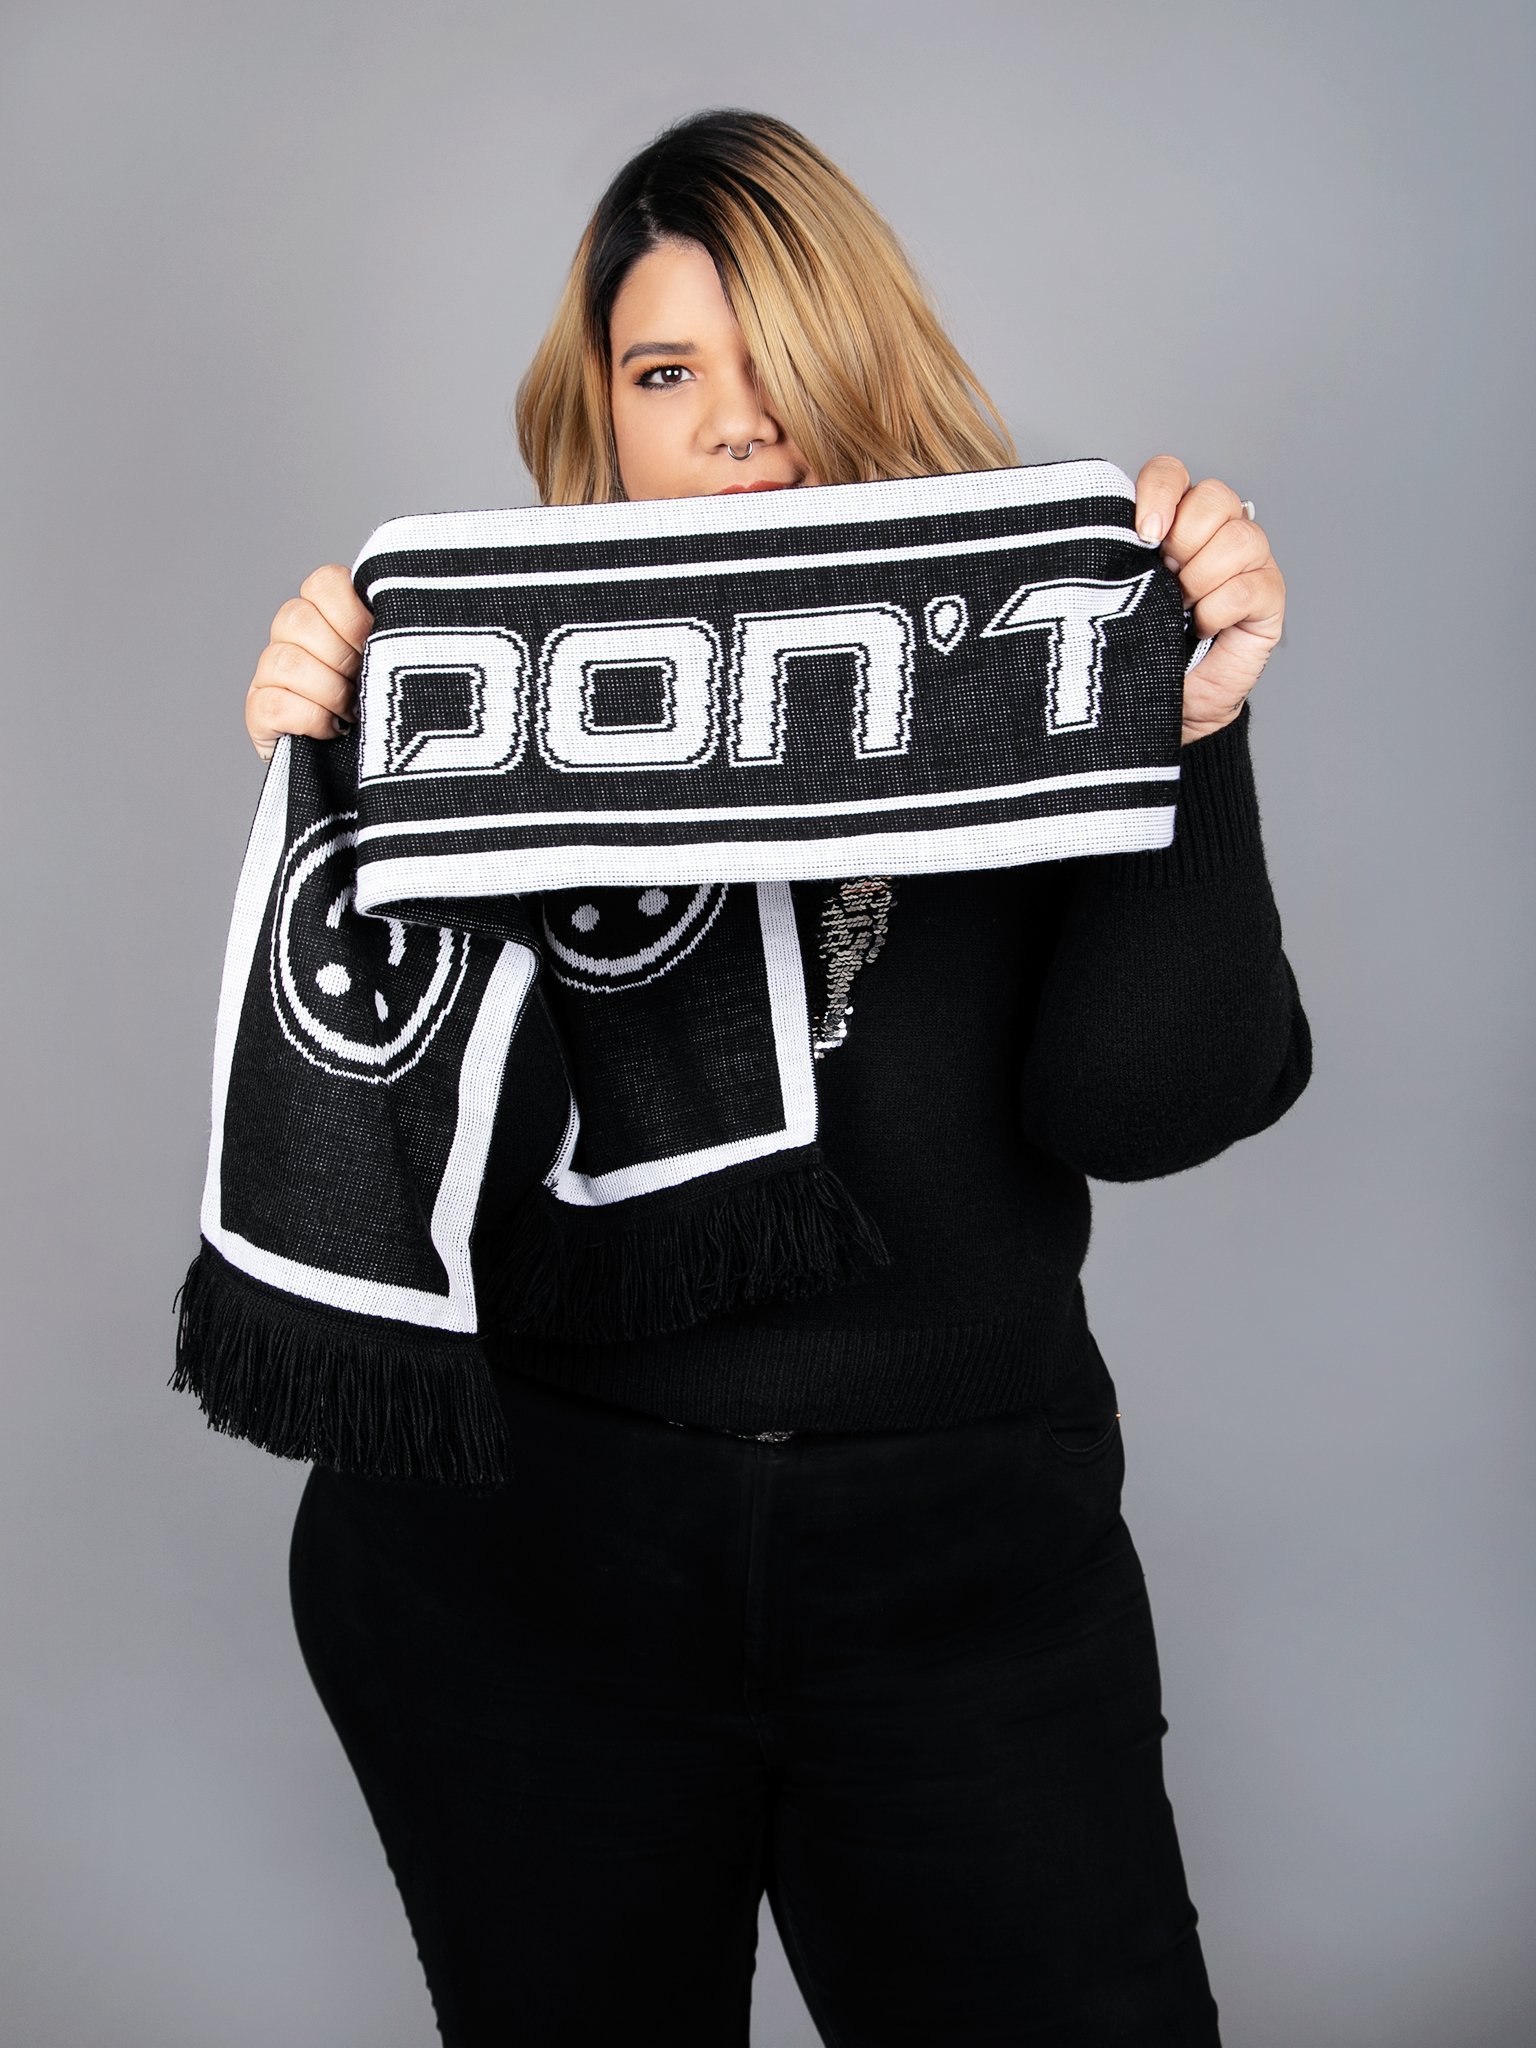 Sarah wearing the Don't Talk To Me Scarf